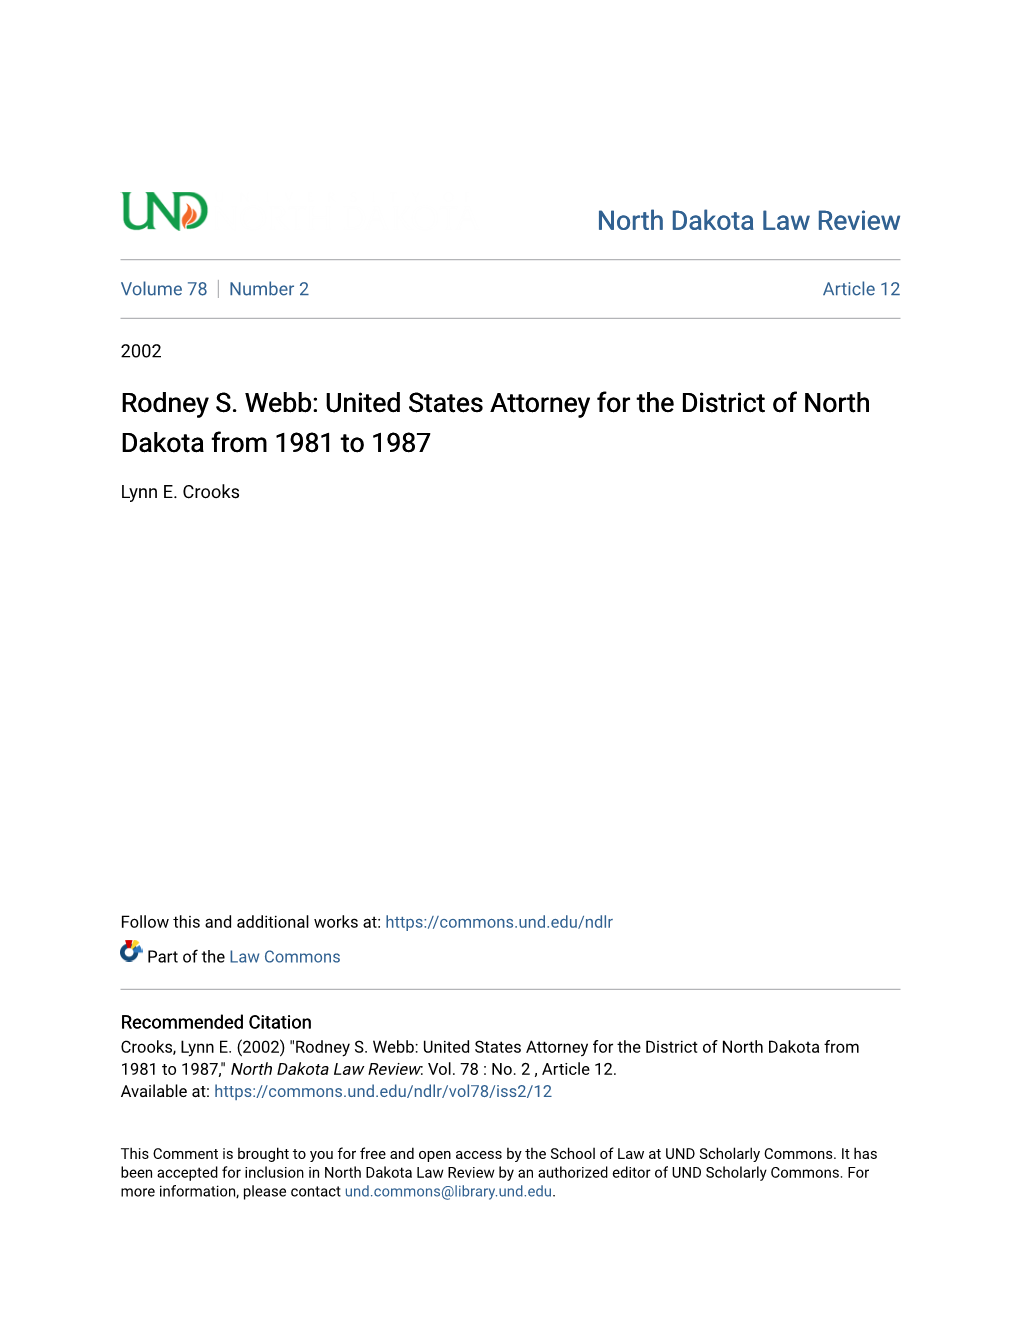 Rodney S. Webb: United States Attorney for the District of North Dakota from 1981 to 1987